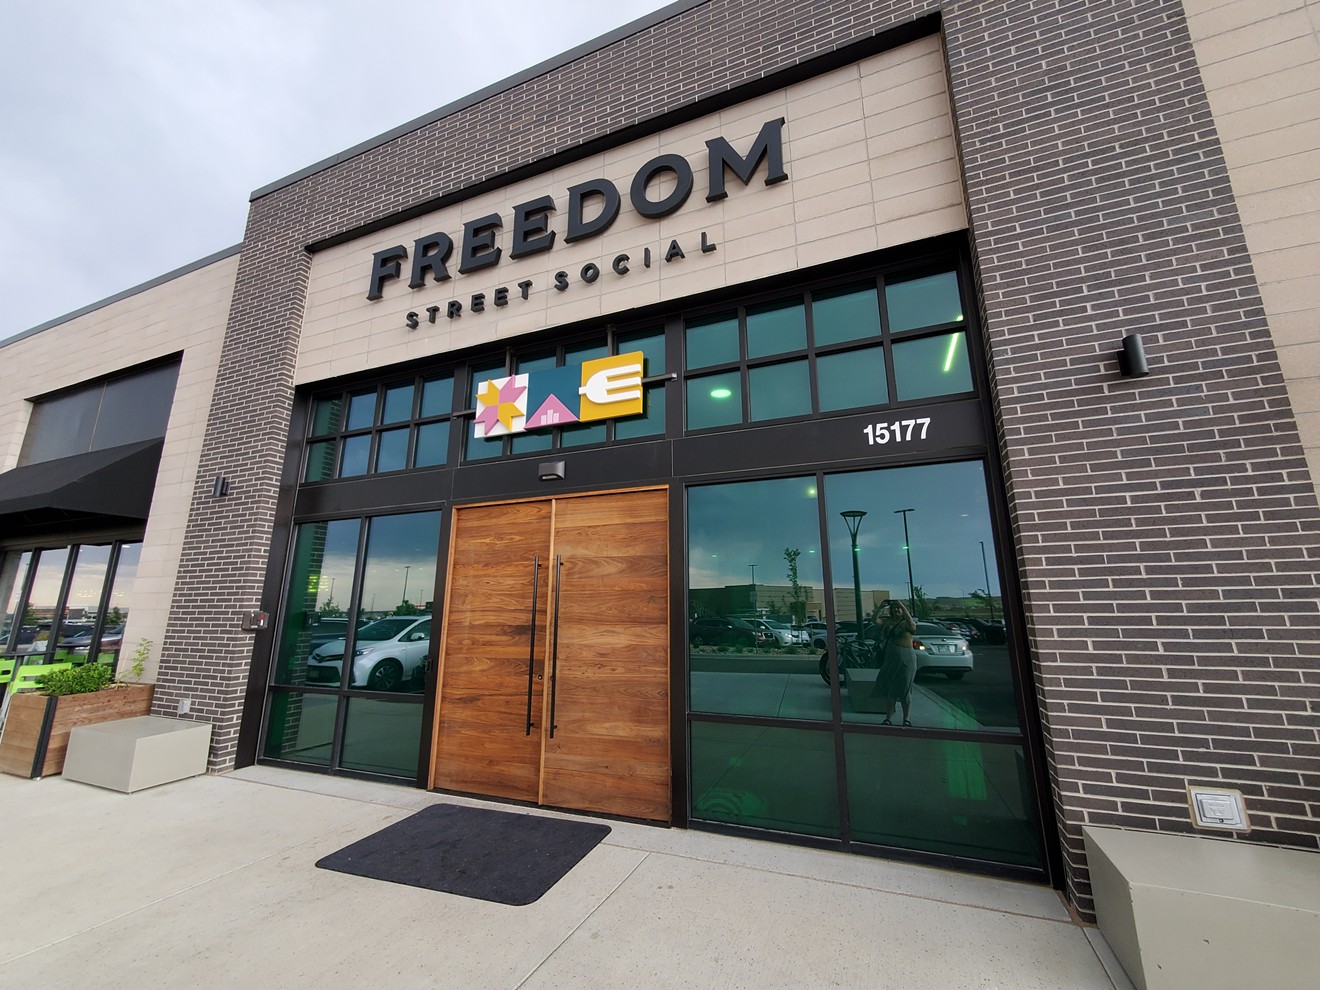 Freedom Street Social was packed for its July 13 grand opening.